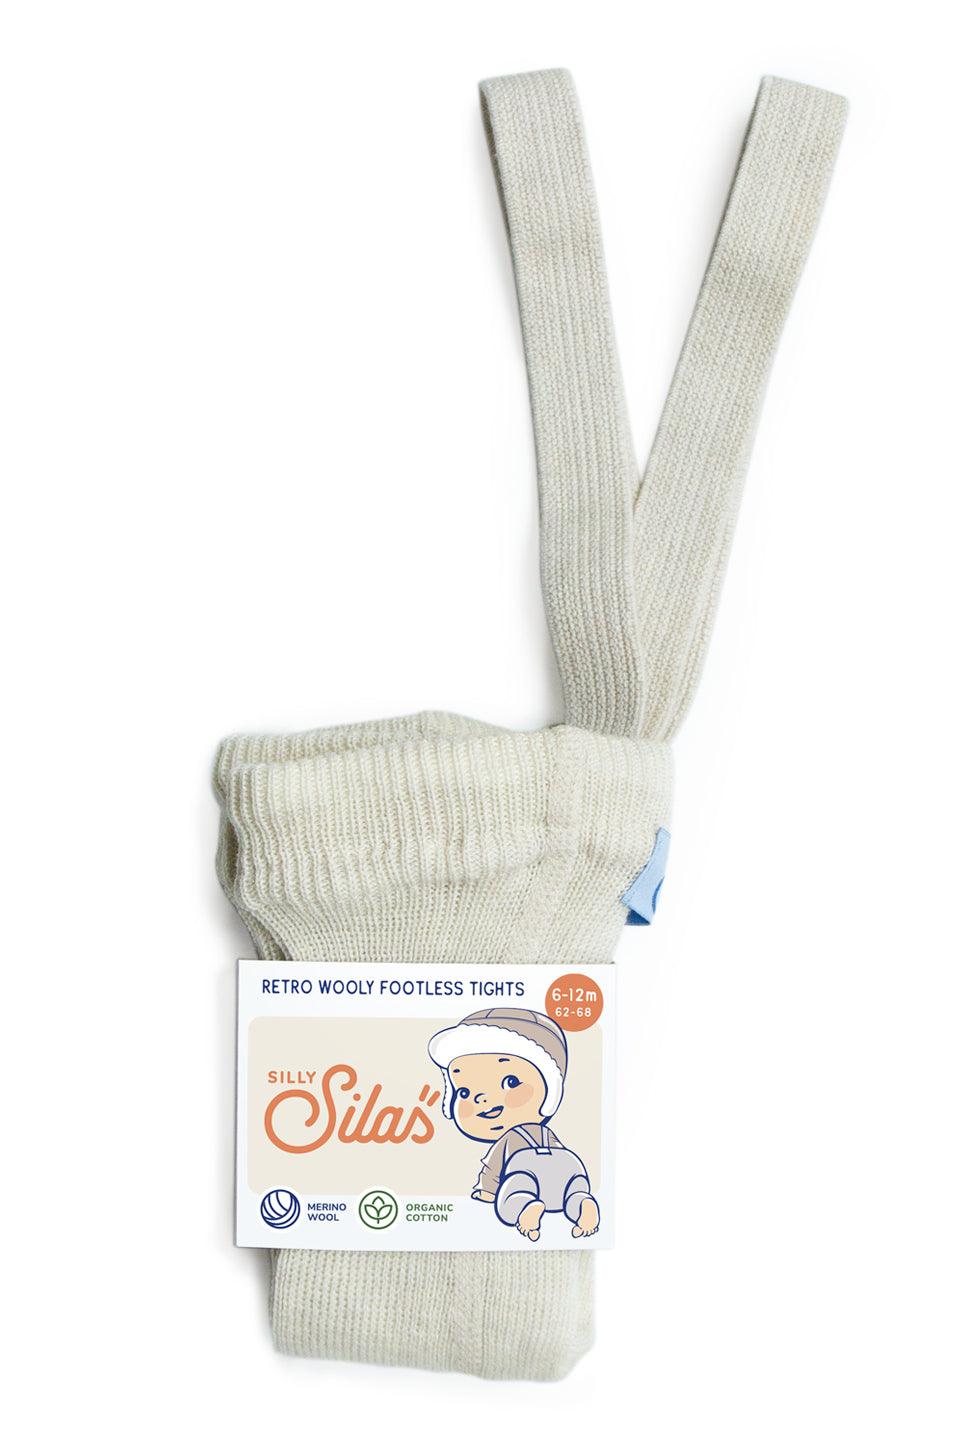 Strumpfhose Wooly Footless 'Cream Blend' - The Little One • Family.Concept.Store. 